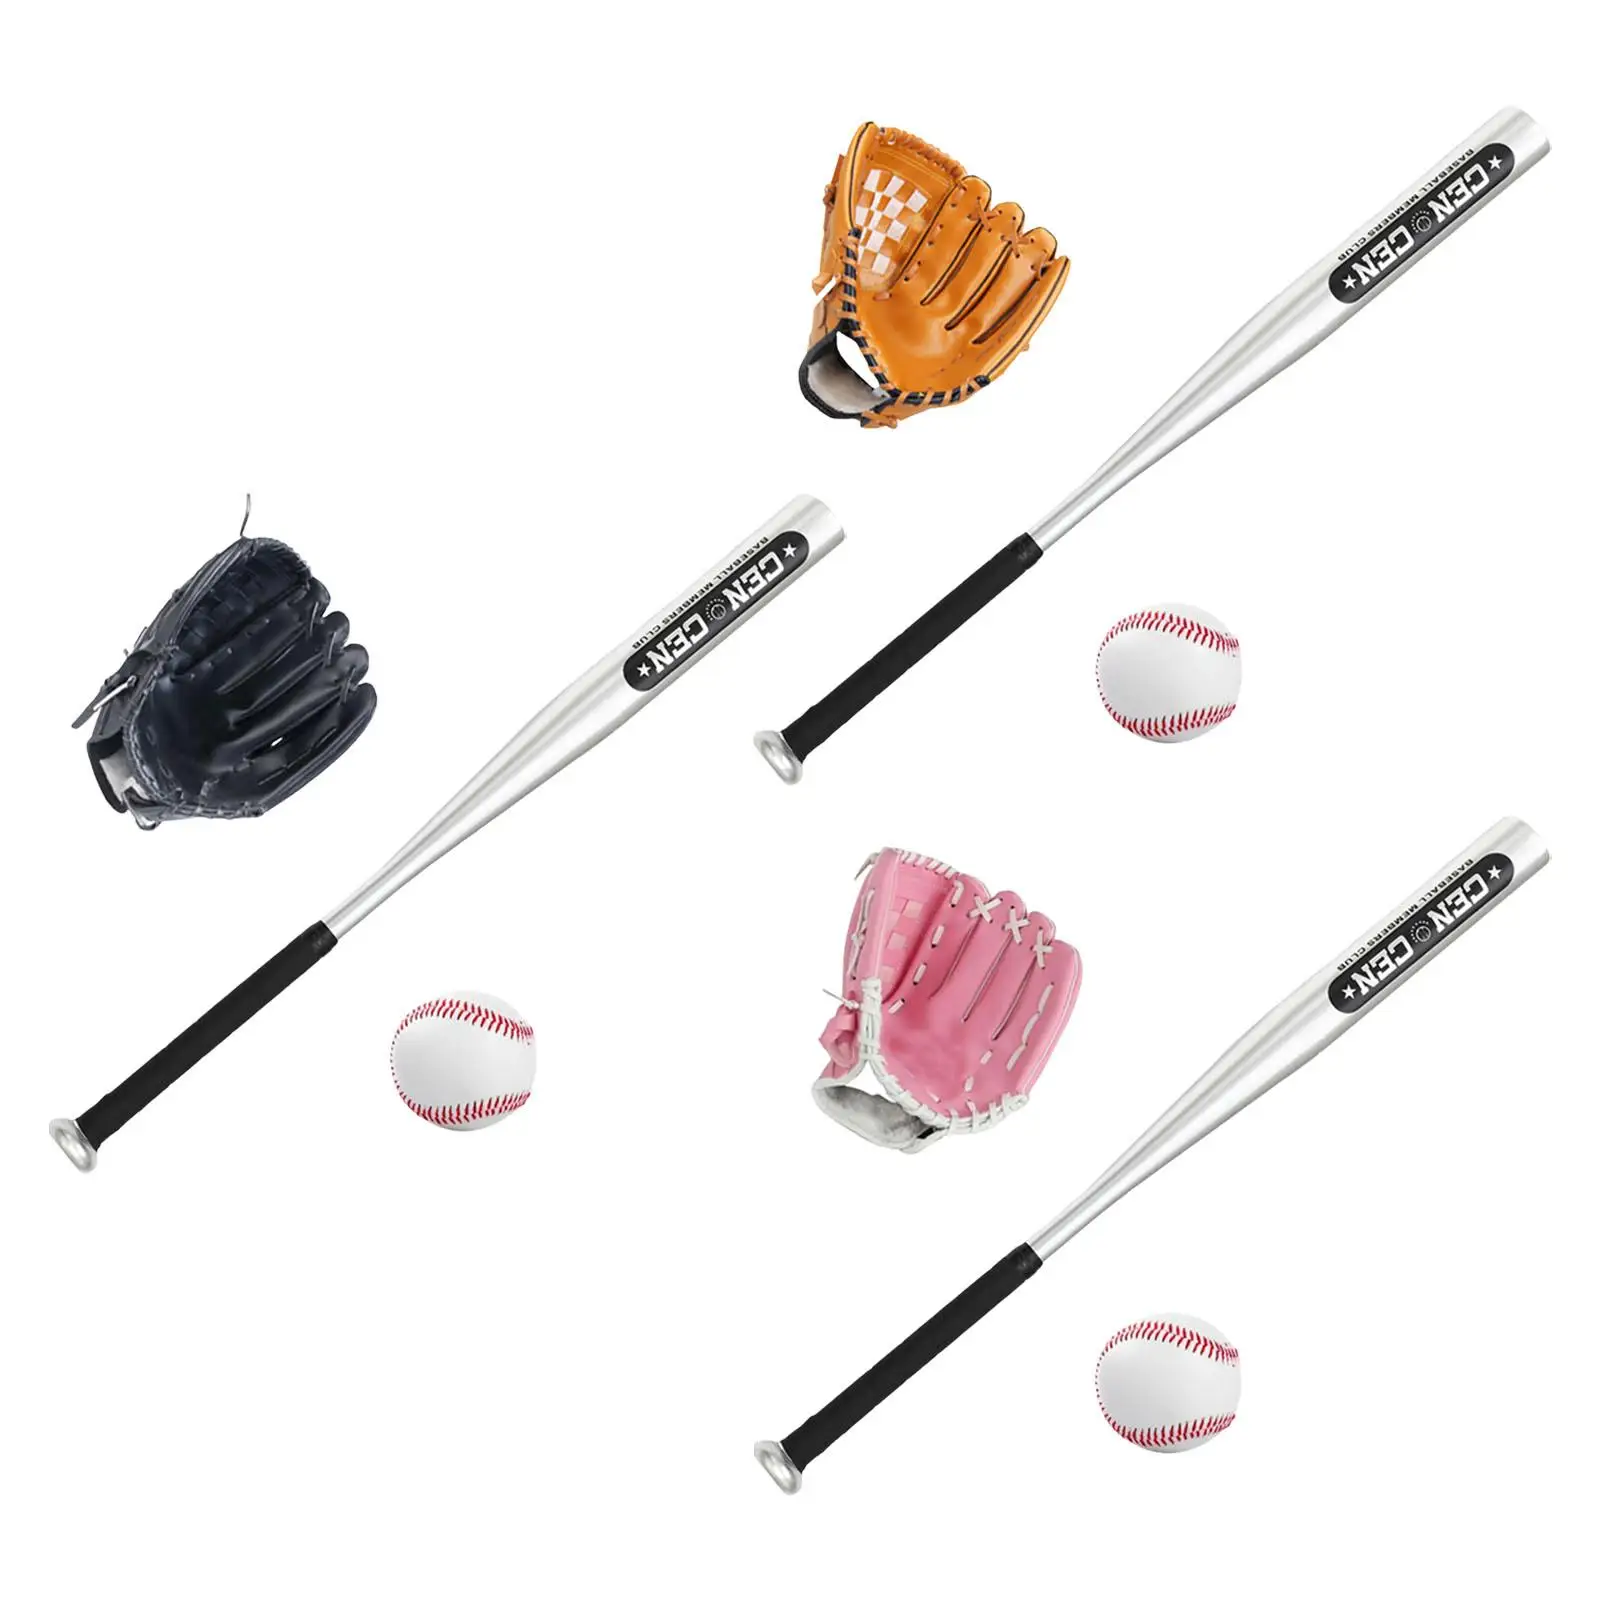 Baseball Bat Set with Baseball Glove and Ball Soft Trainer for Home Toddler